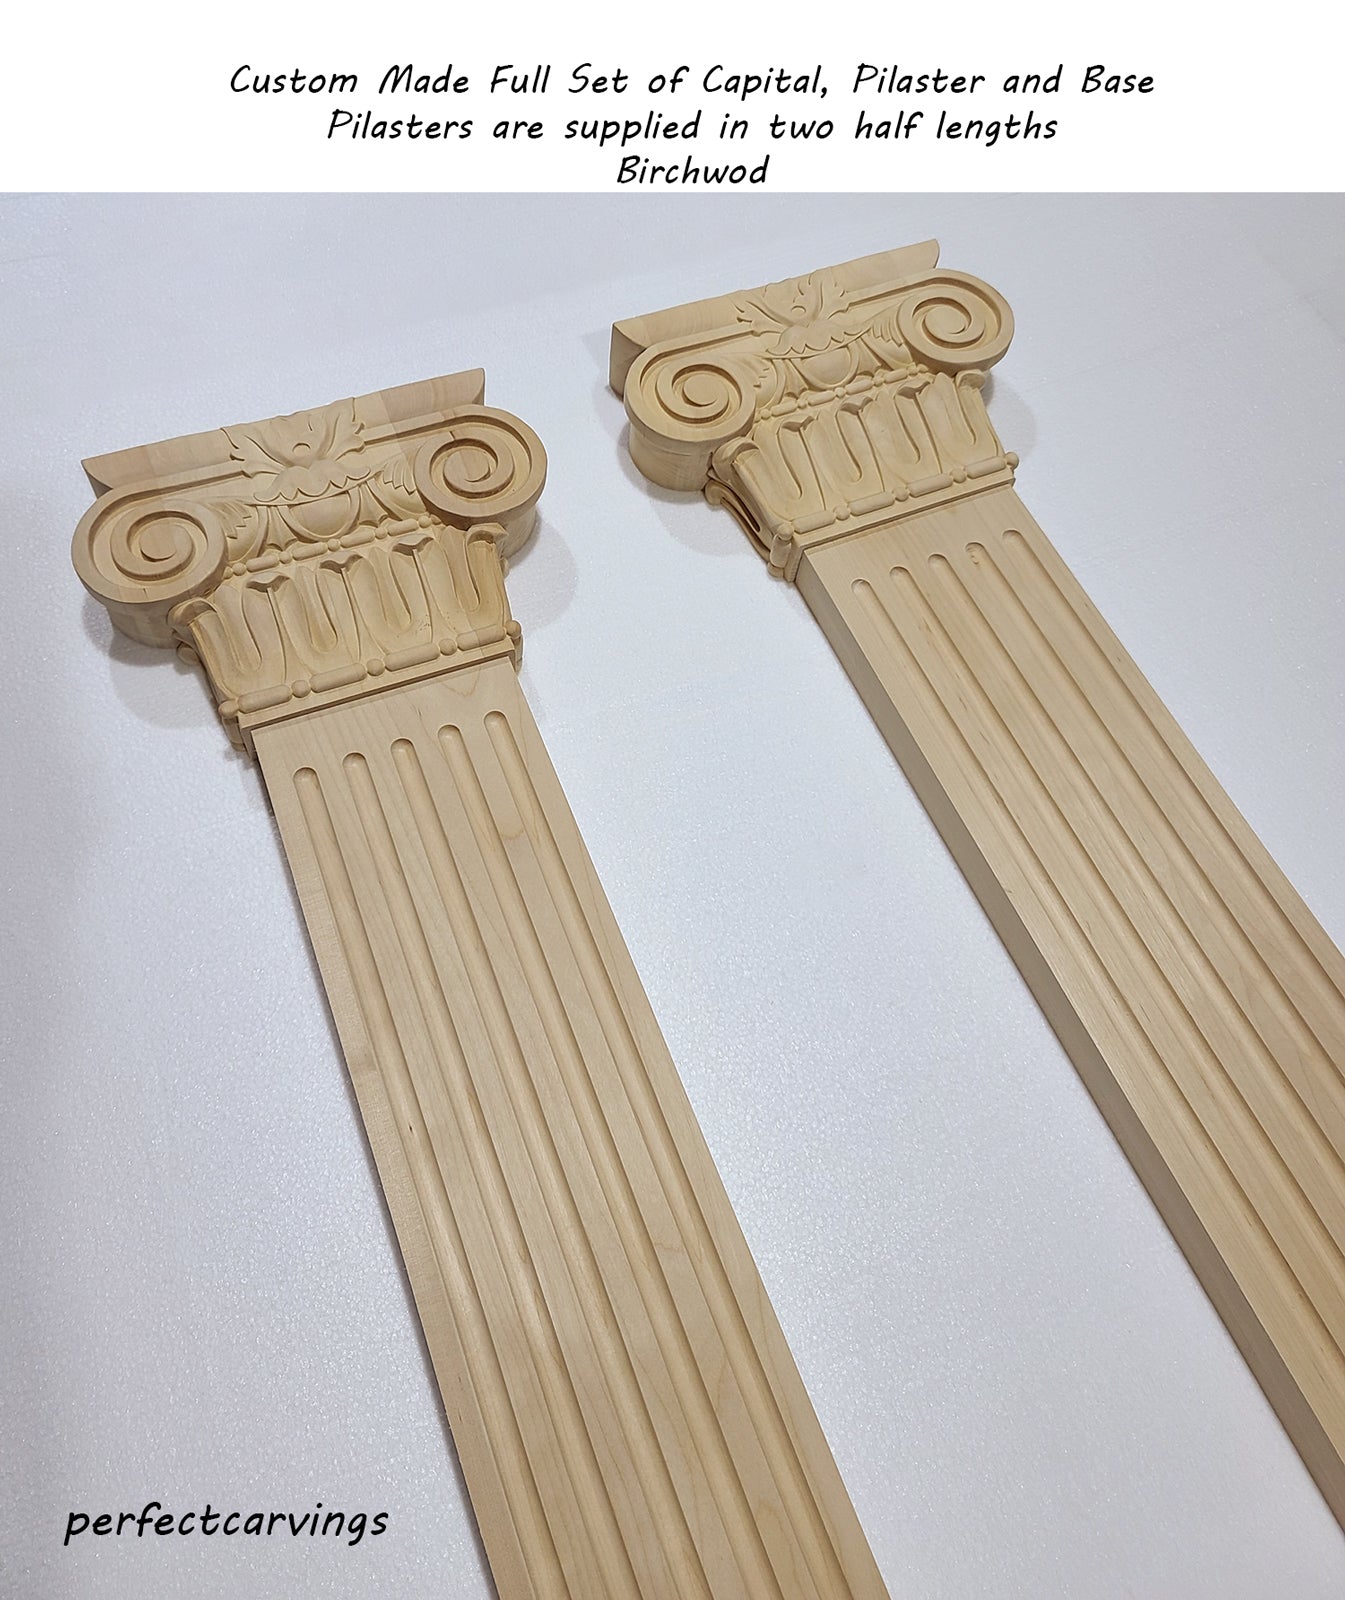 PAIR of Wood Carved Large Roman Capitals for 6-1/4"Wx2"D Pilaster Columns